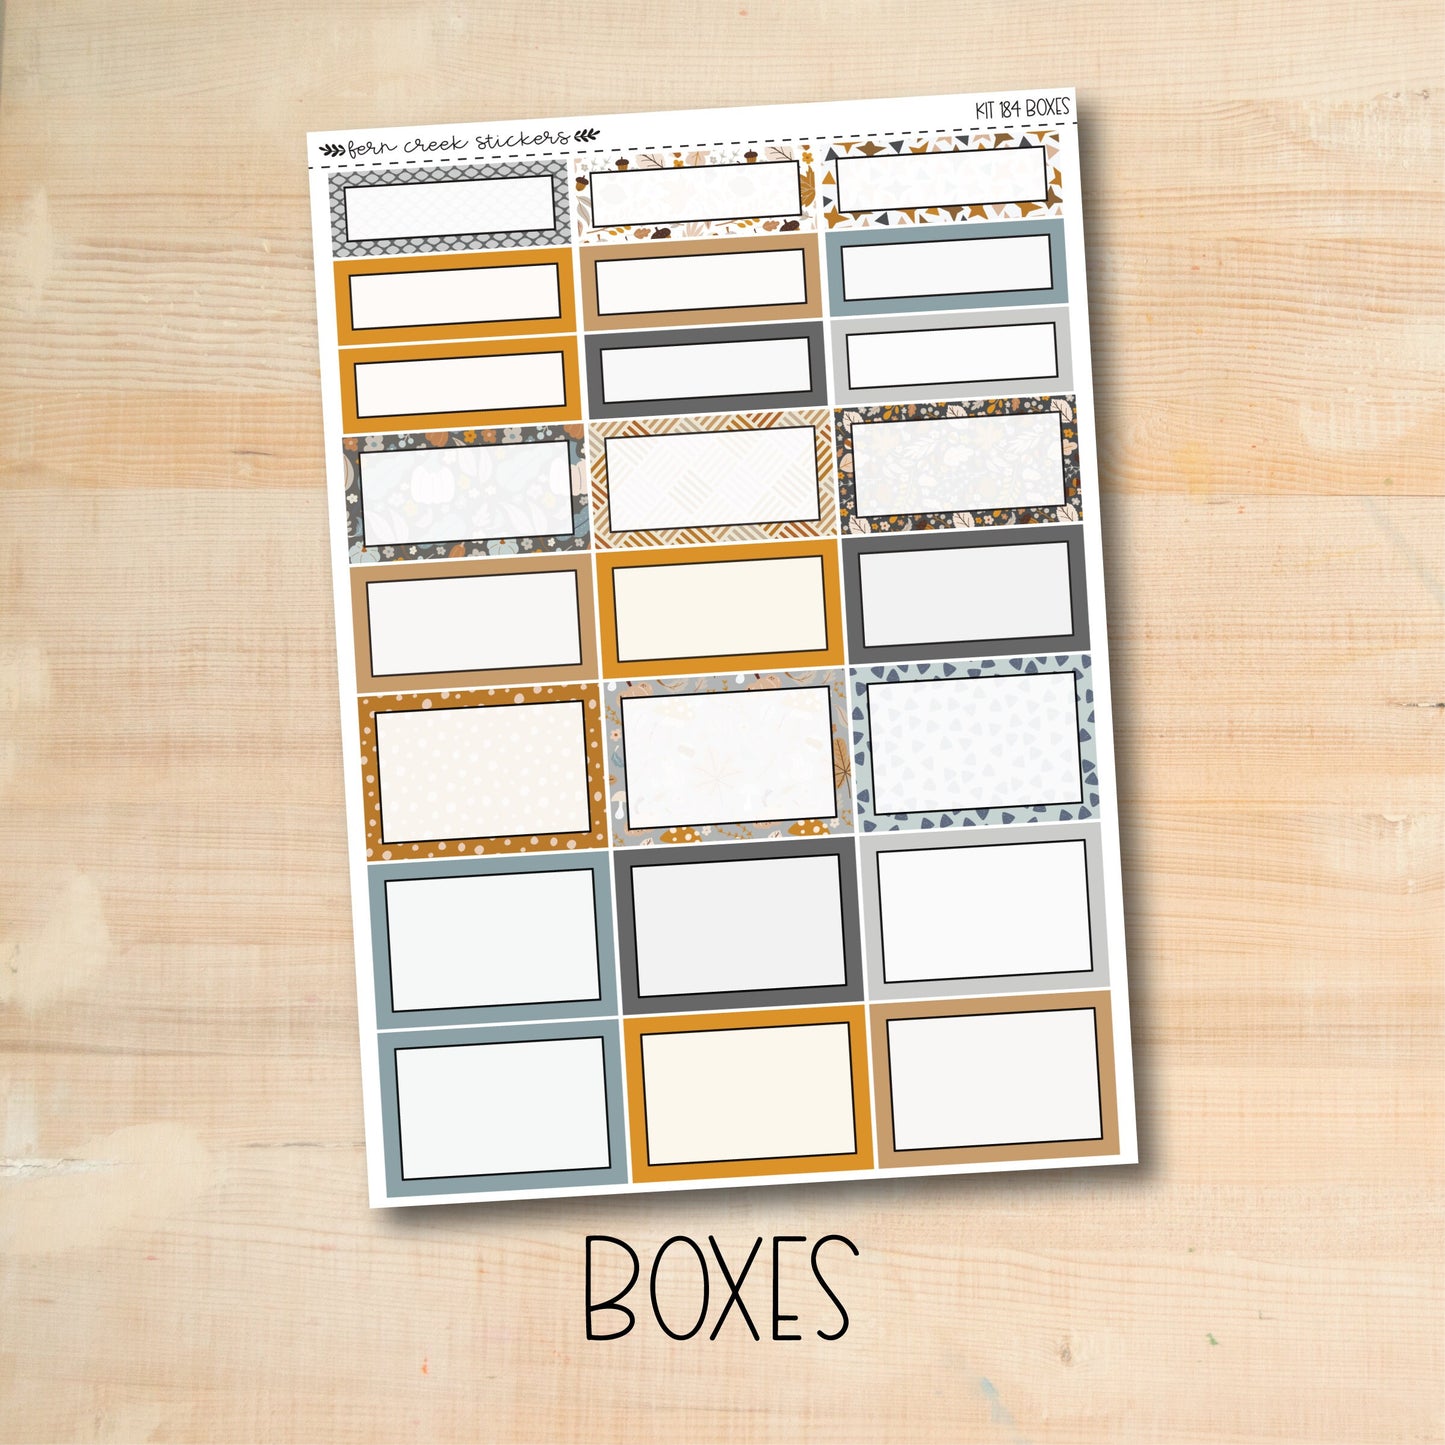 KIT-184 || AUTUMN DREAMS weekly planner kit for Erin Condren, Plum Paper, MakseLife and more!